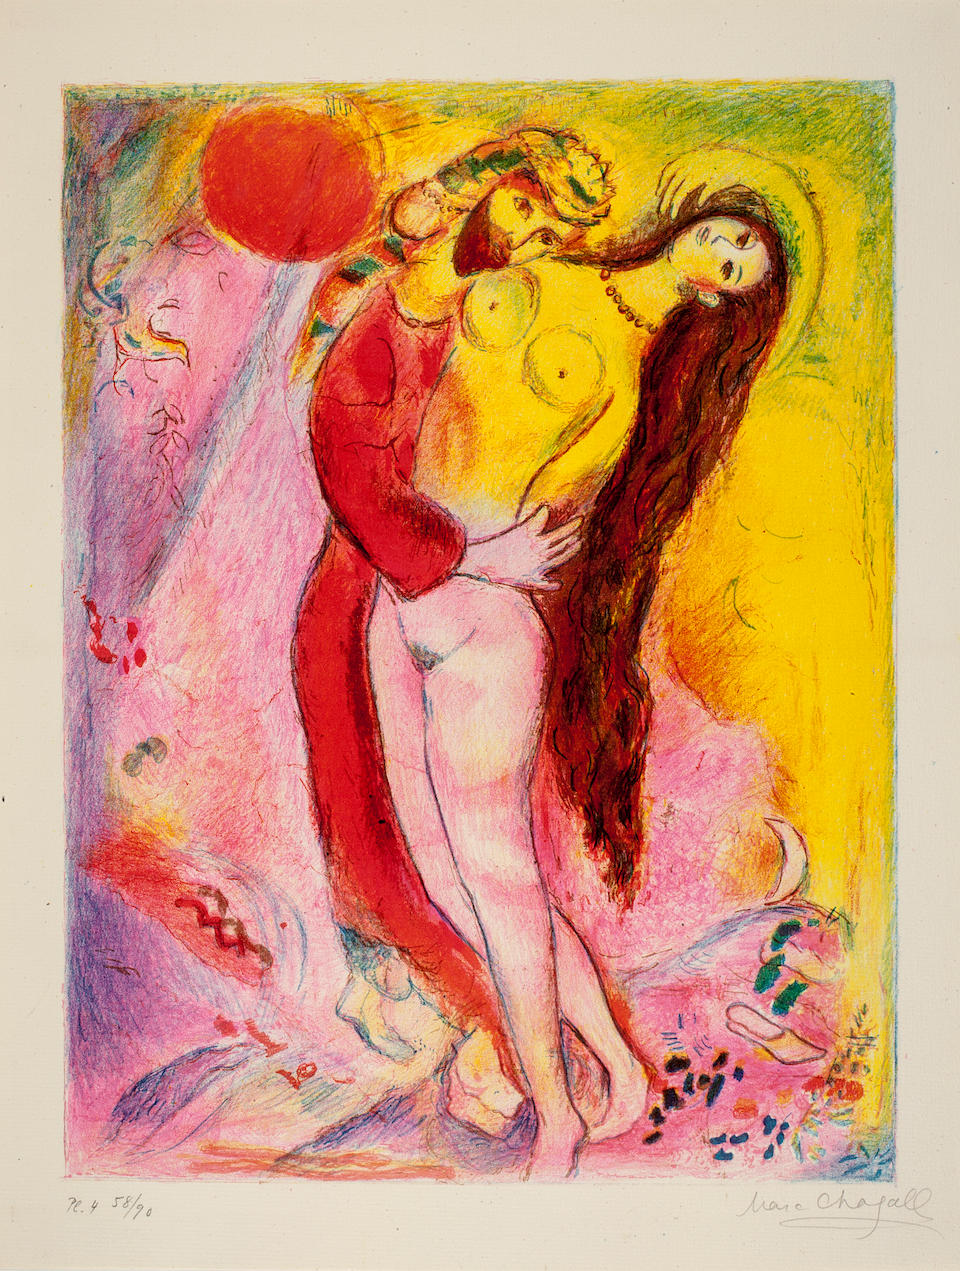 CHAGALL, MARC. RUSSIAN/FRENCH, 1887-1985. Four Tales from the Arabian Nights. New York: Pantheon Books, [1948].